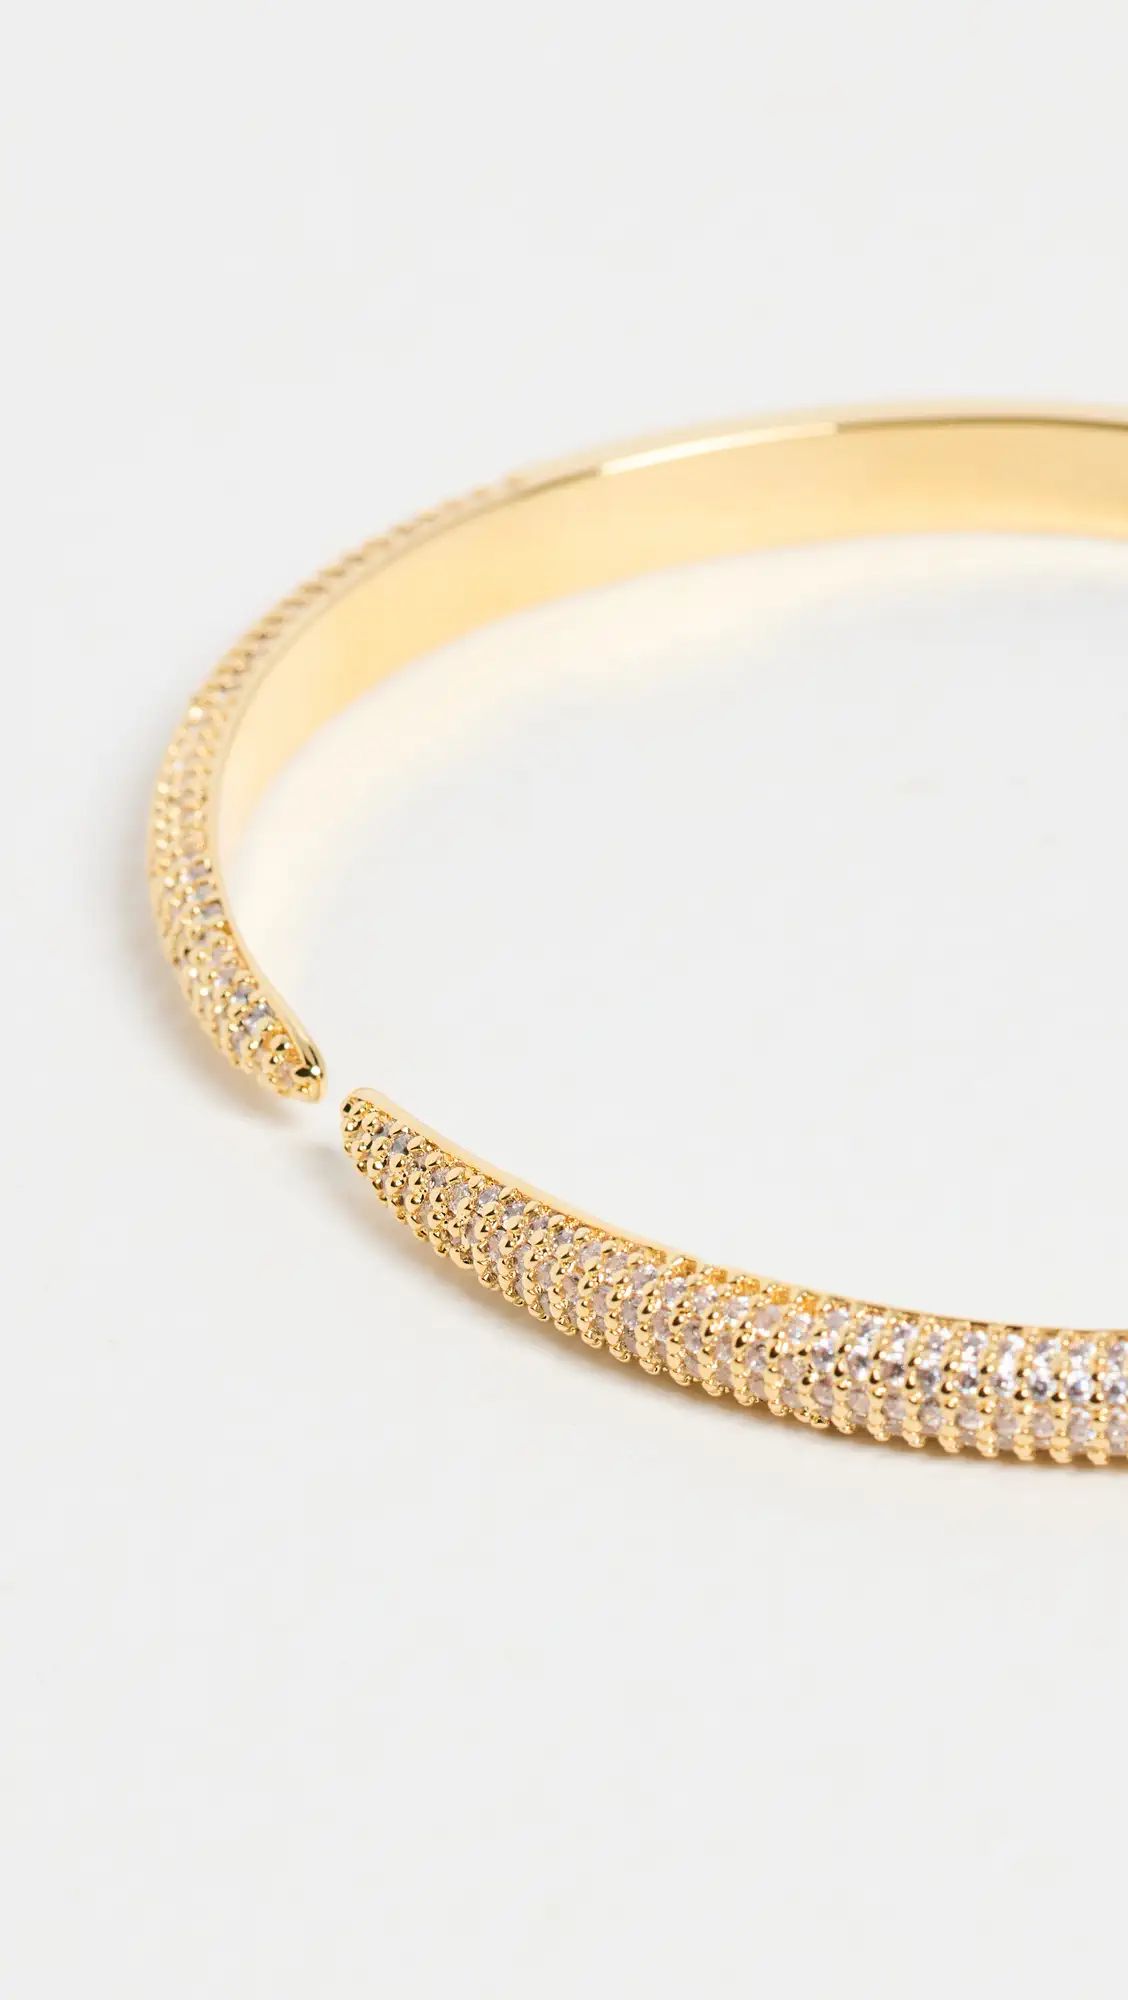 1 Cttw Pave Pointed Hinge Bangle | Shopbop